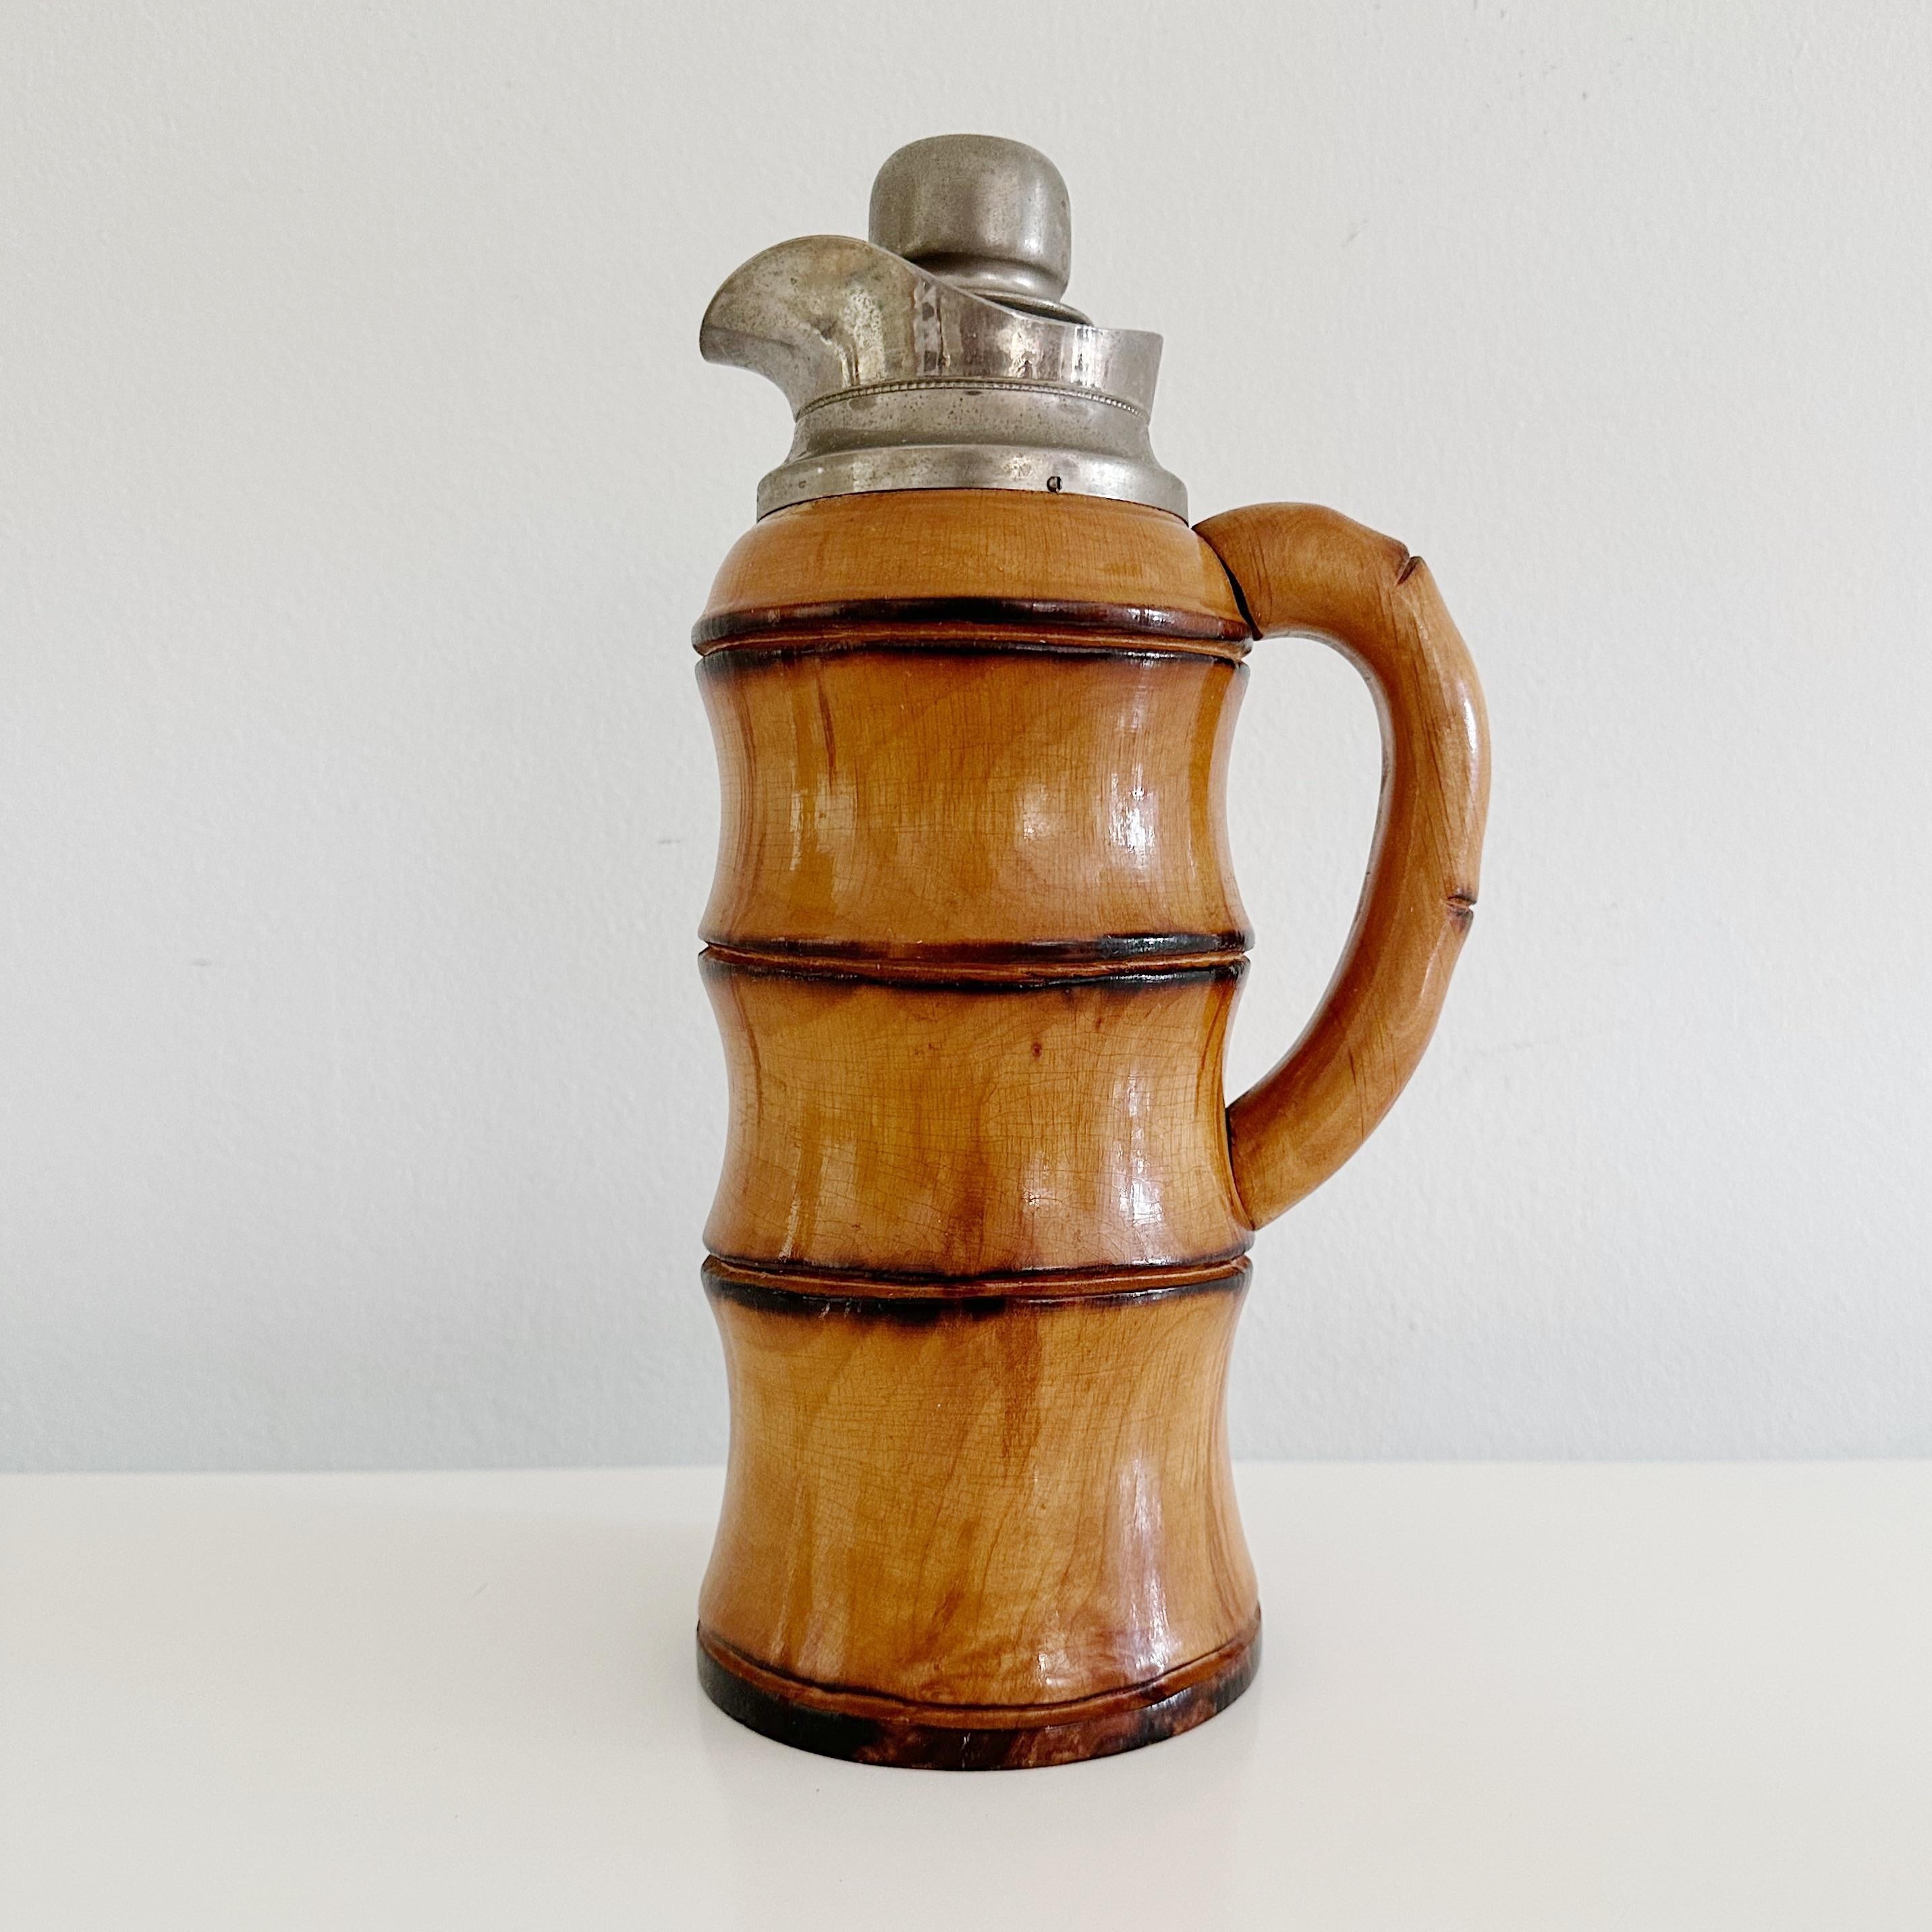 Midcentury thermos decanter in bamboo and metal by Aldo Tura For Macabo Cusano Milanino, 1950's. Made from asian bamboo with the inside glass part having a double cavity, and a cork and metal stopper.   Signed on the underside.